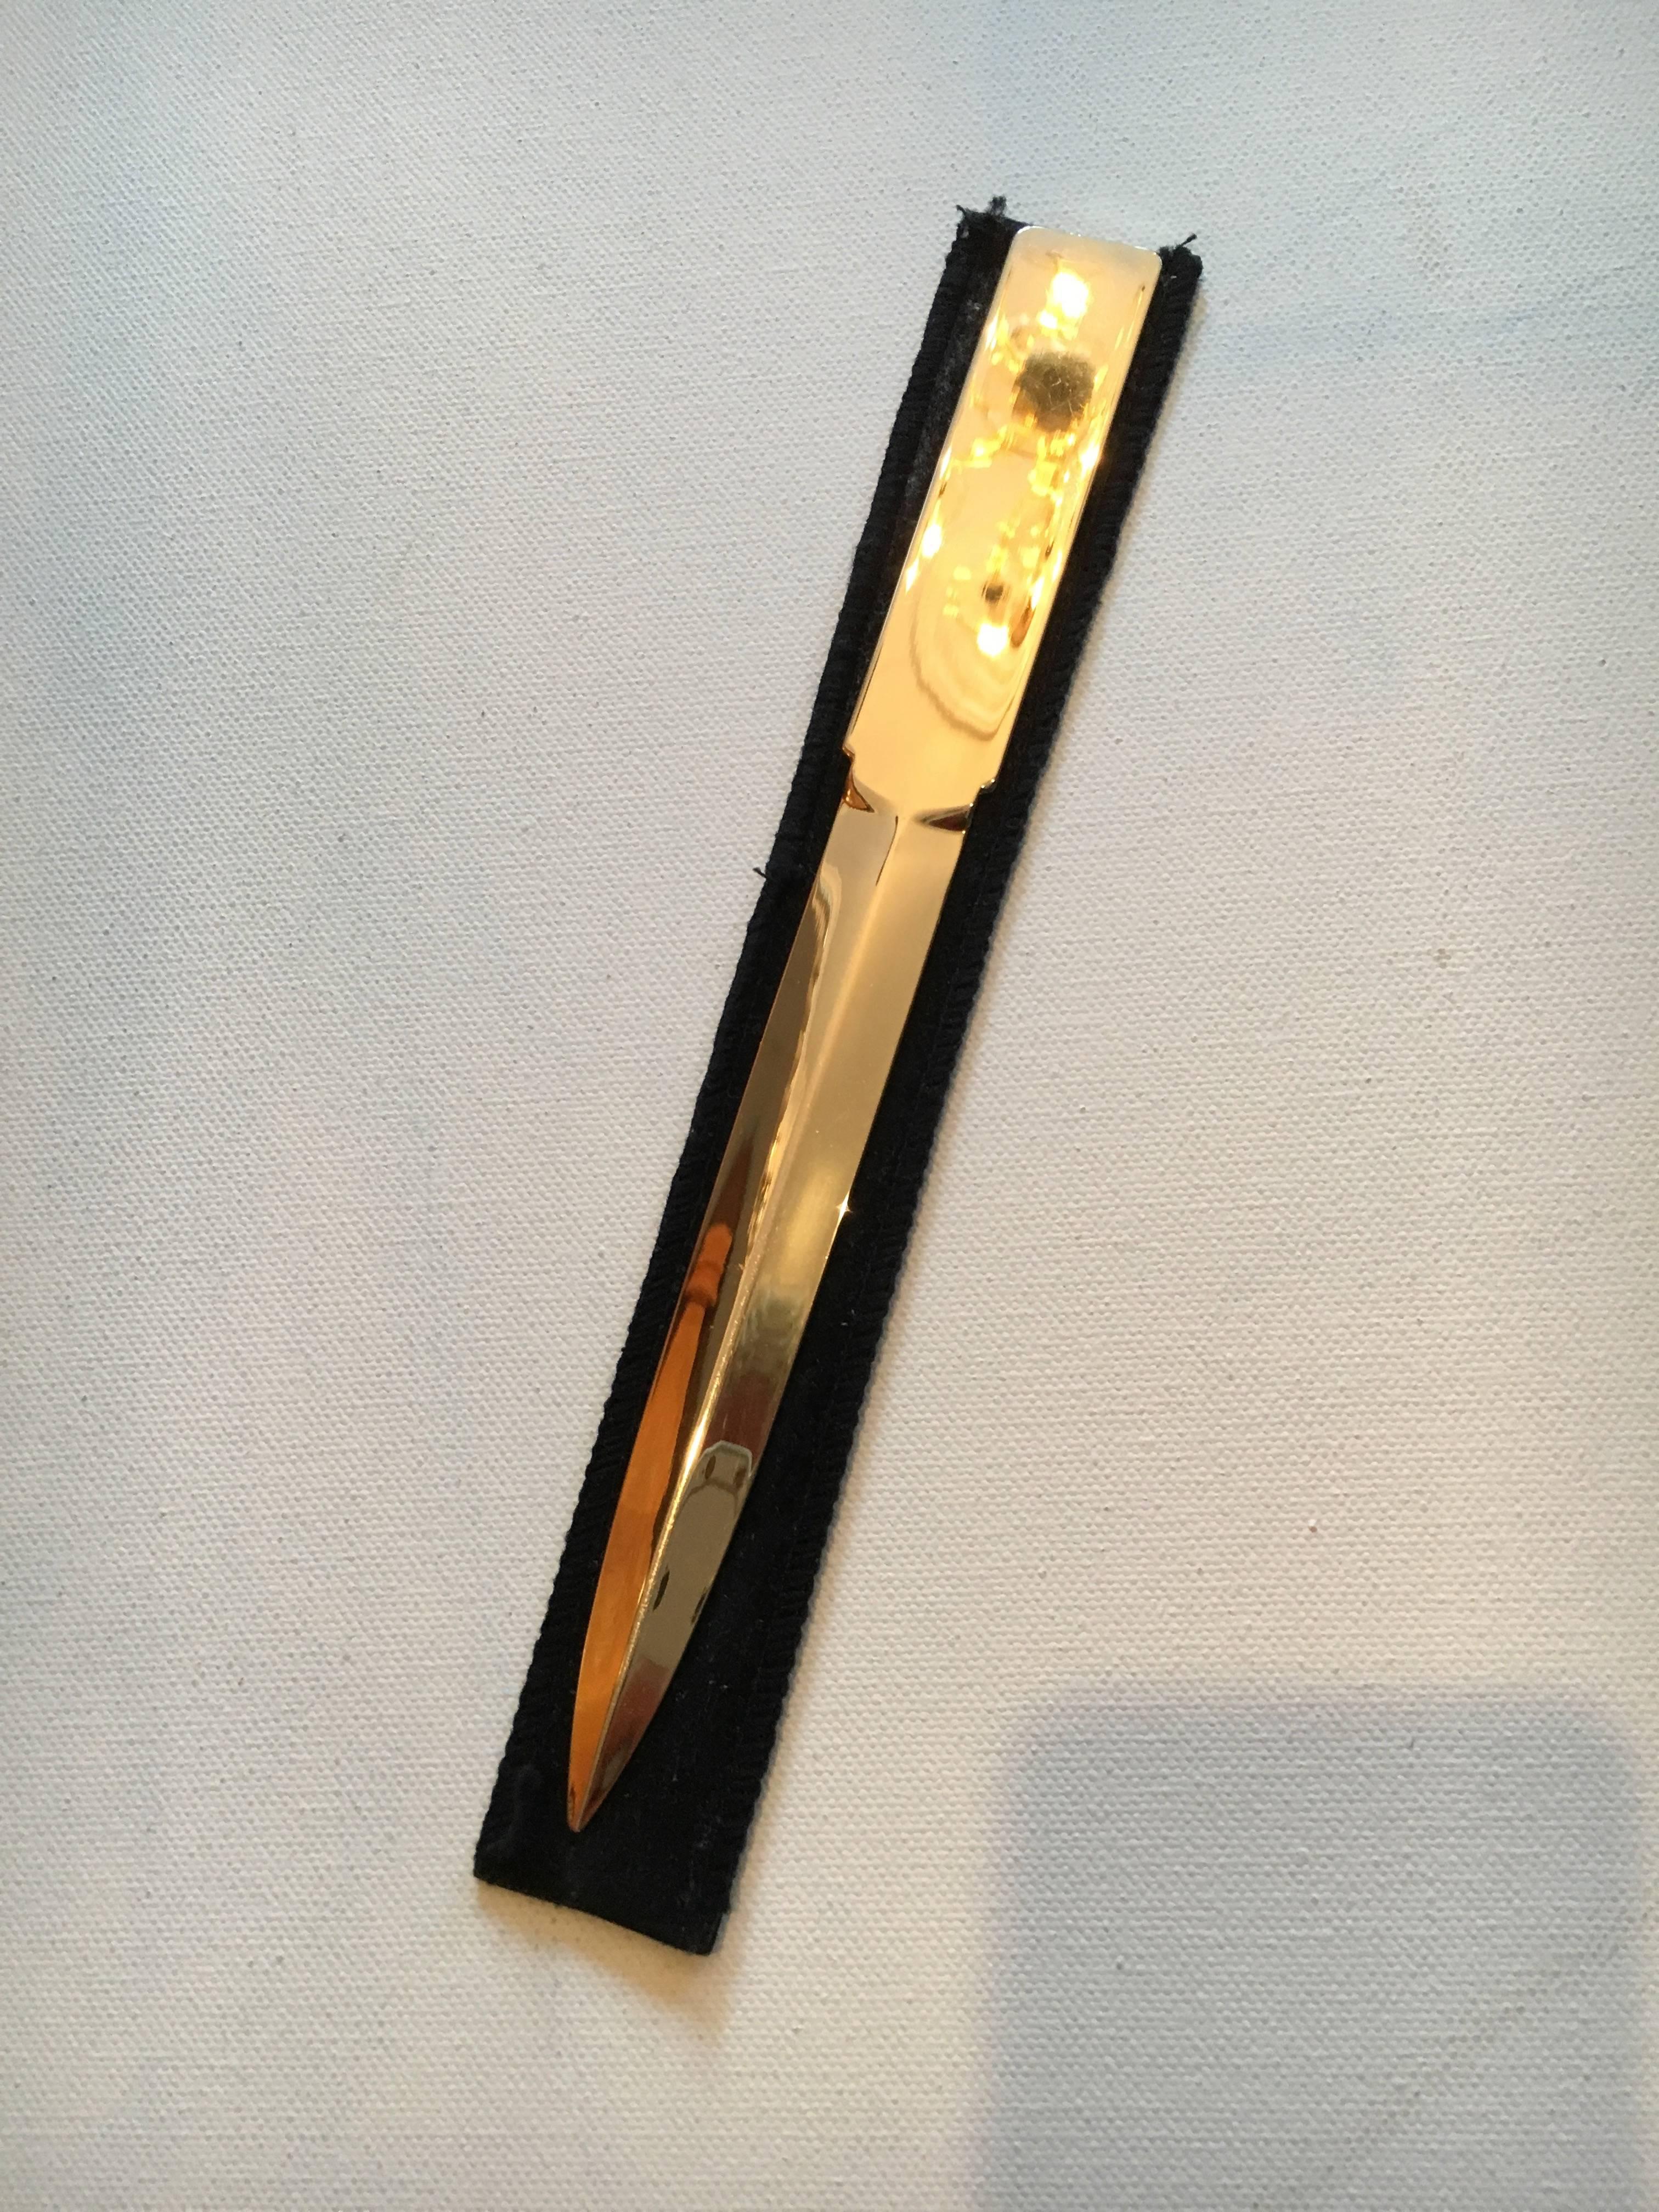 Gold plate letter opener with felt case. A beauty on any desk - a great gift for Father's Day.